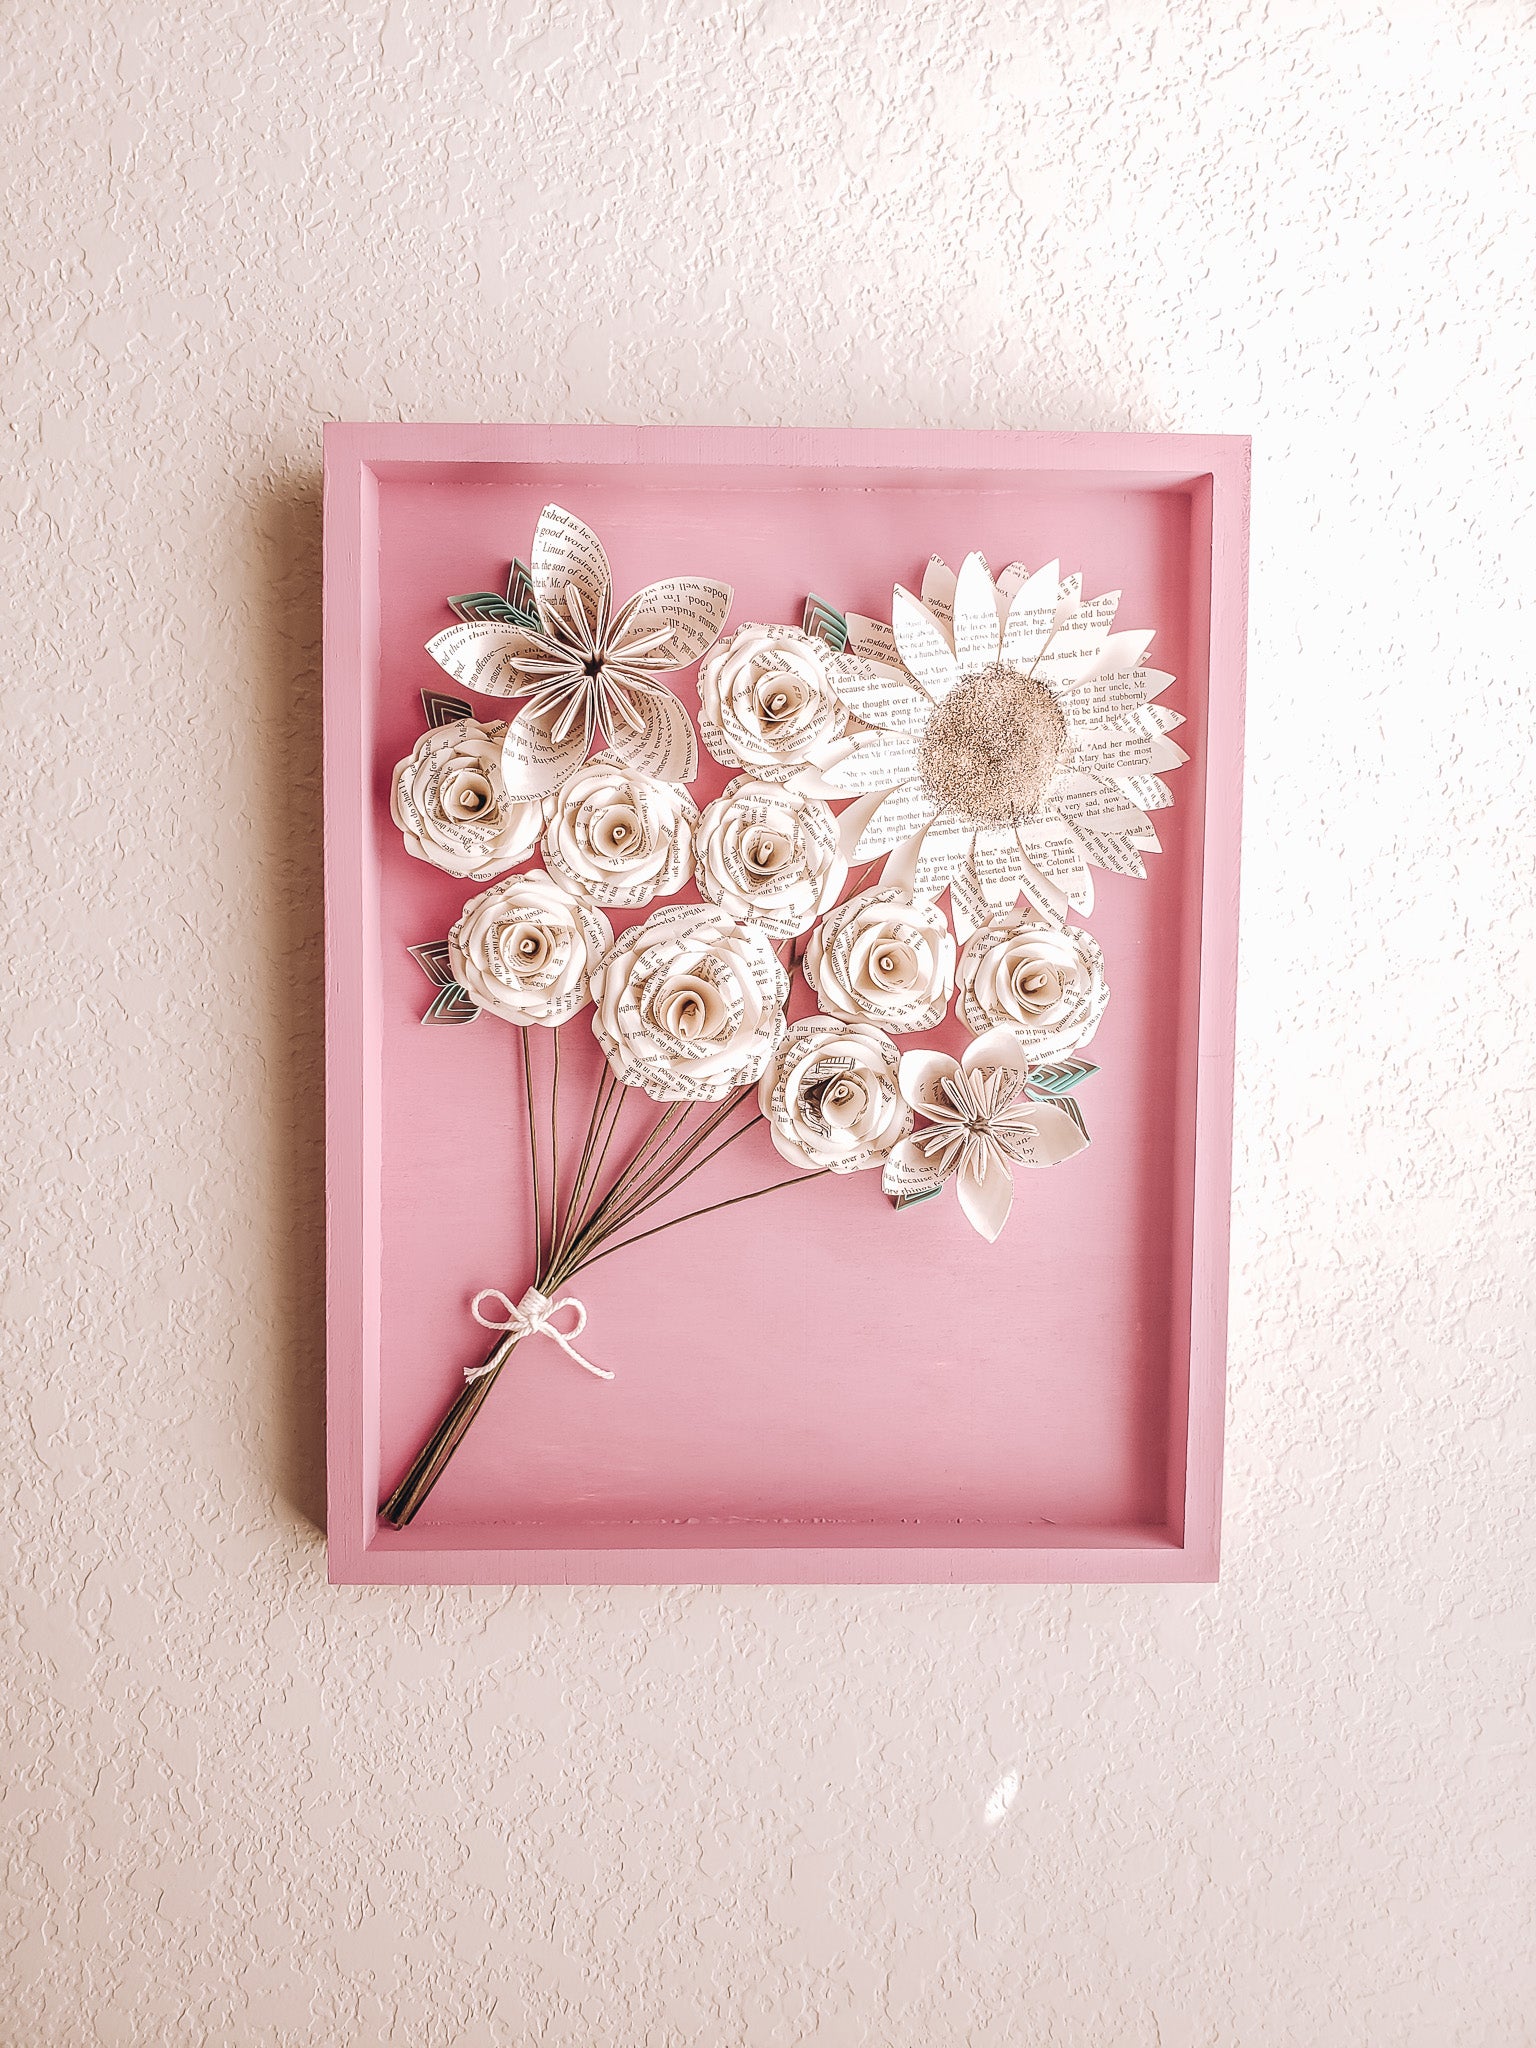 Framed art piece of book page paper flowers in the shape of a bouquet - Novel Blossoms Co